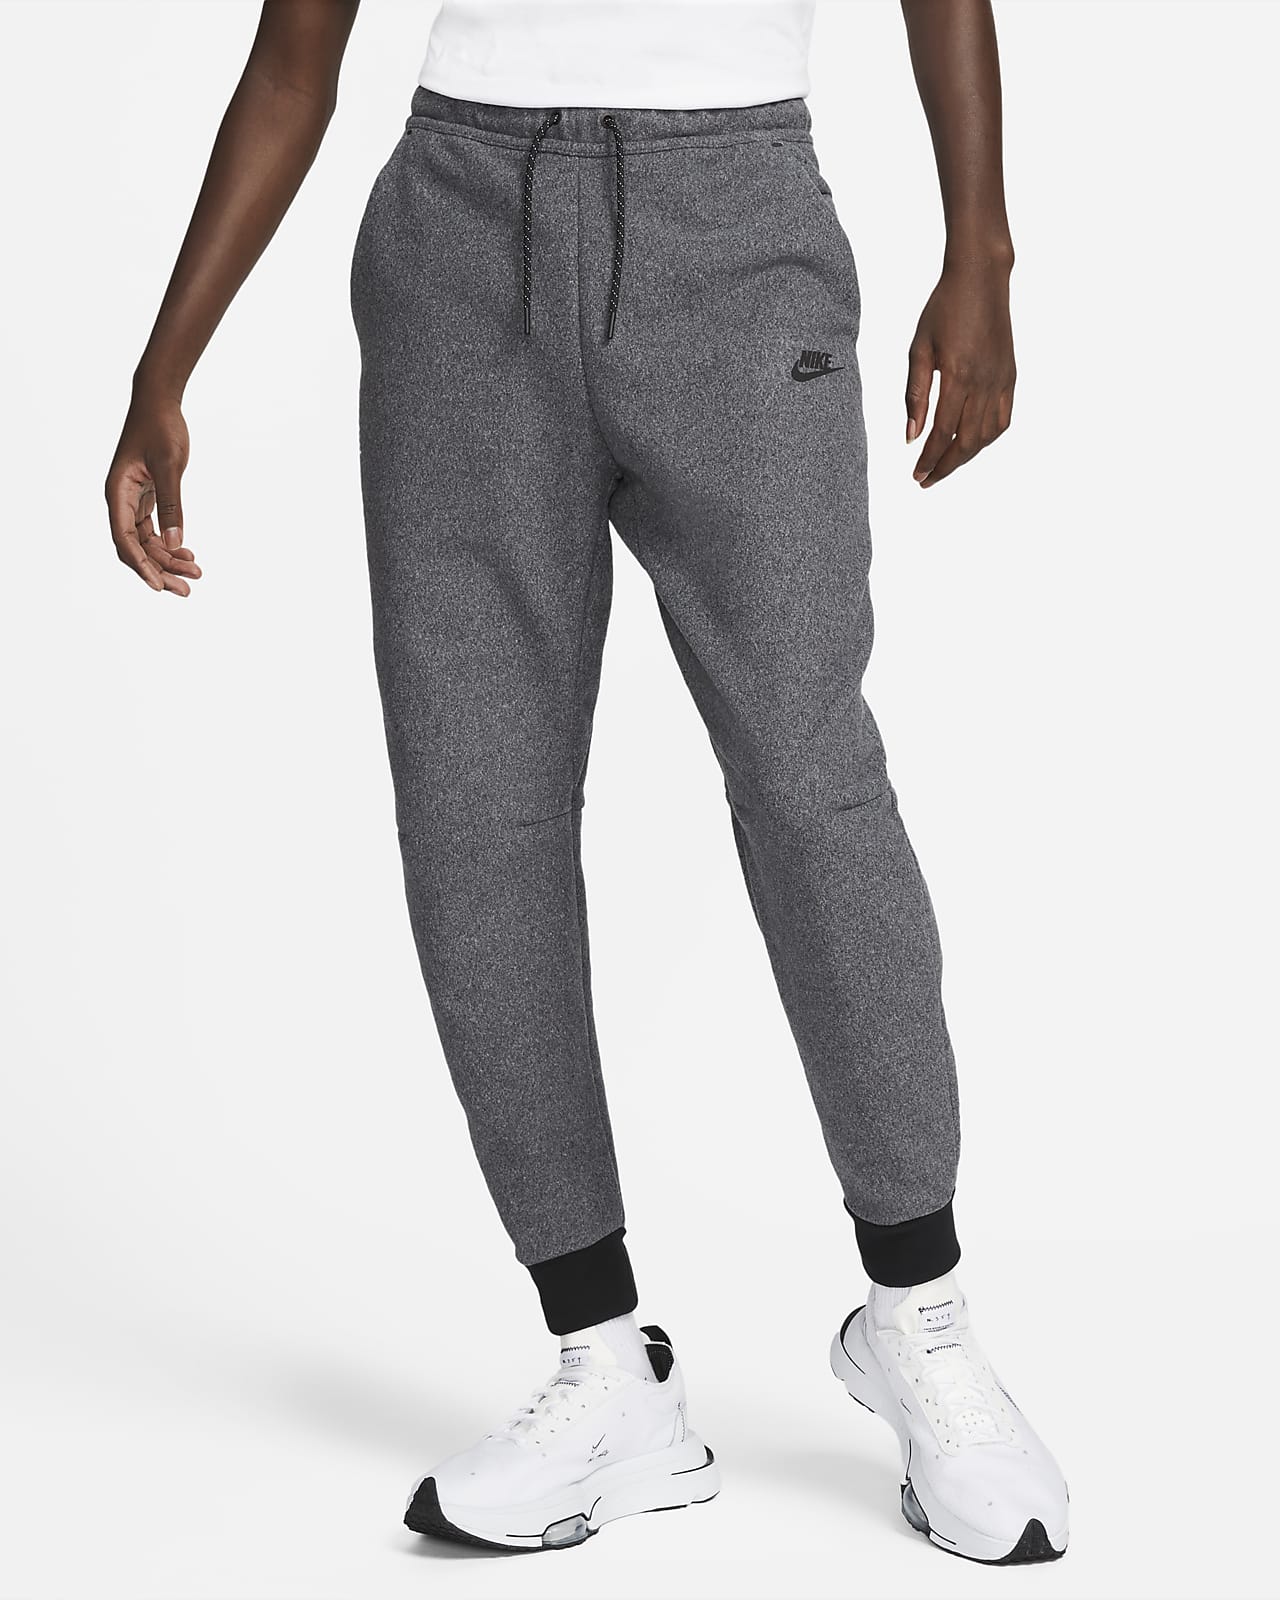 joggers nike homme